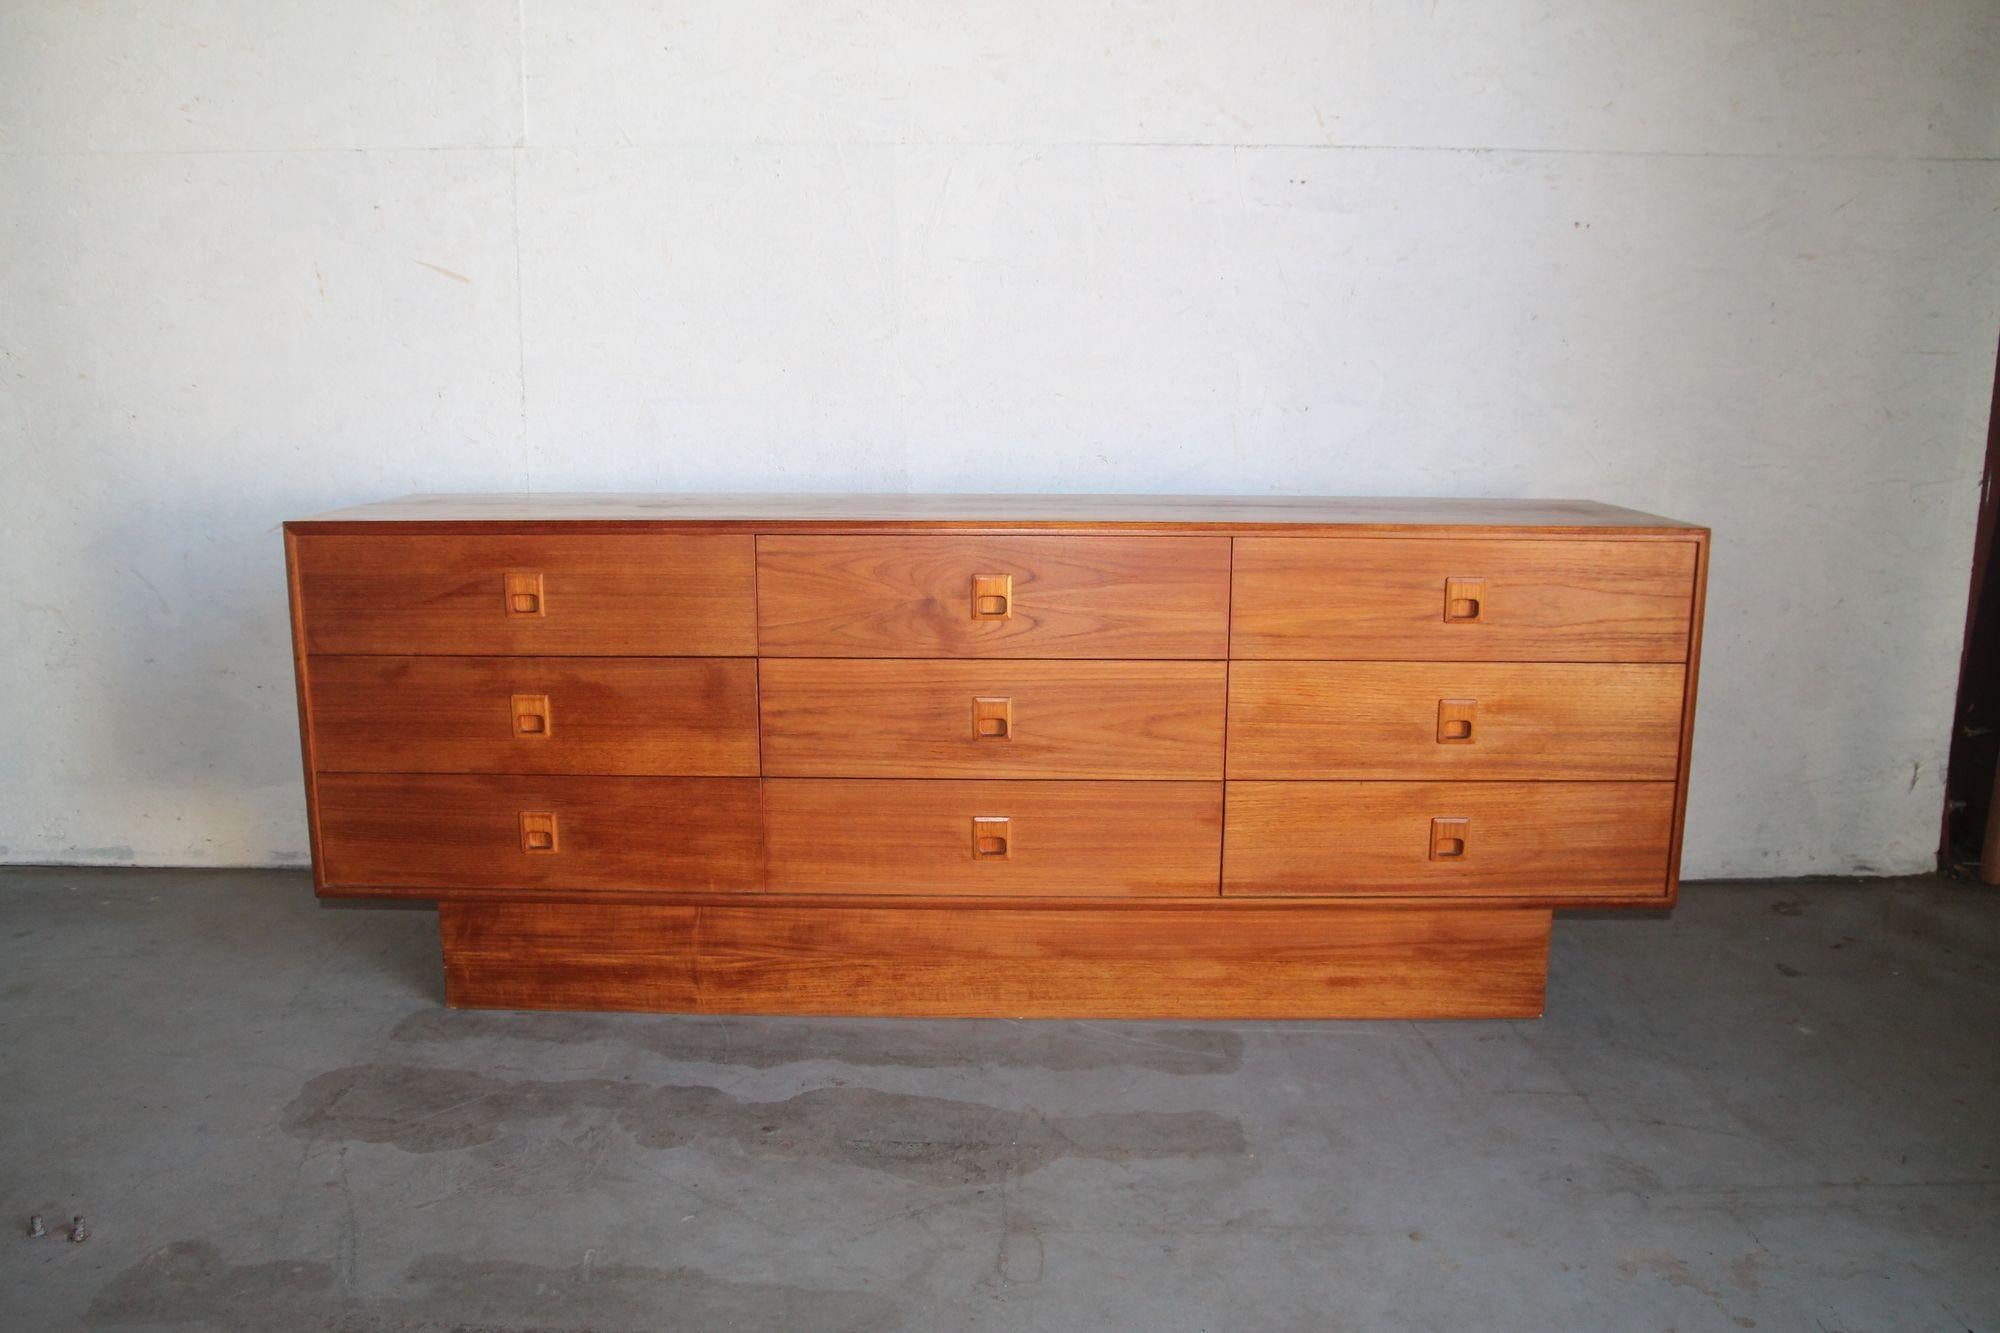 Nice Danish dresser with 9 draws. The dresser has simple pulls that you can see in the photos. In good vintage condition with only a few chips on the back of the sides. Will look great in your mid century bedroom